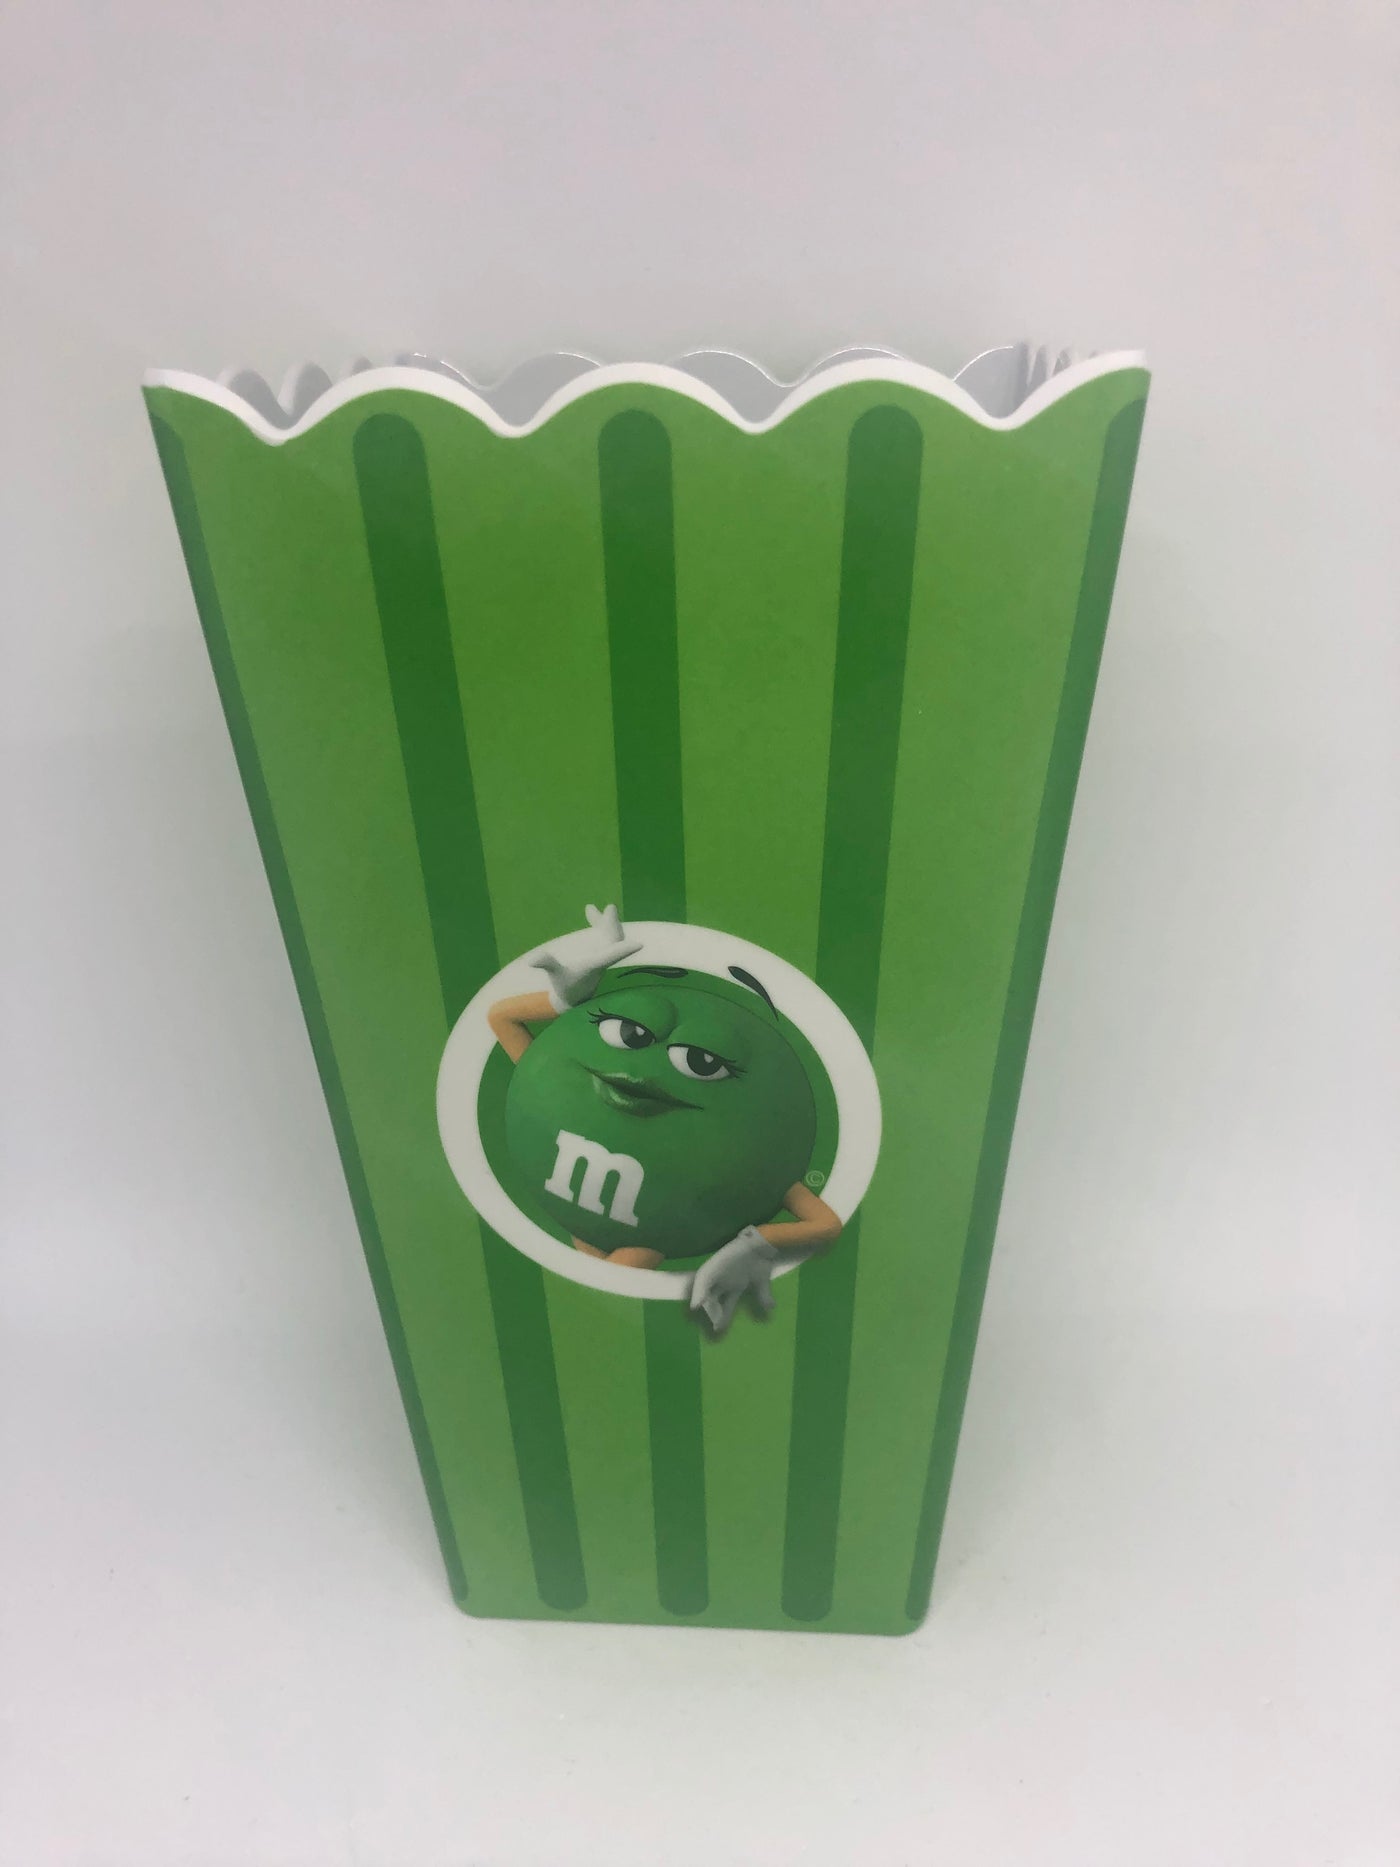 M&M's World Green Popcorn Container New